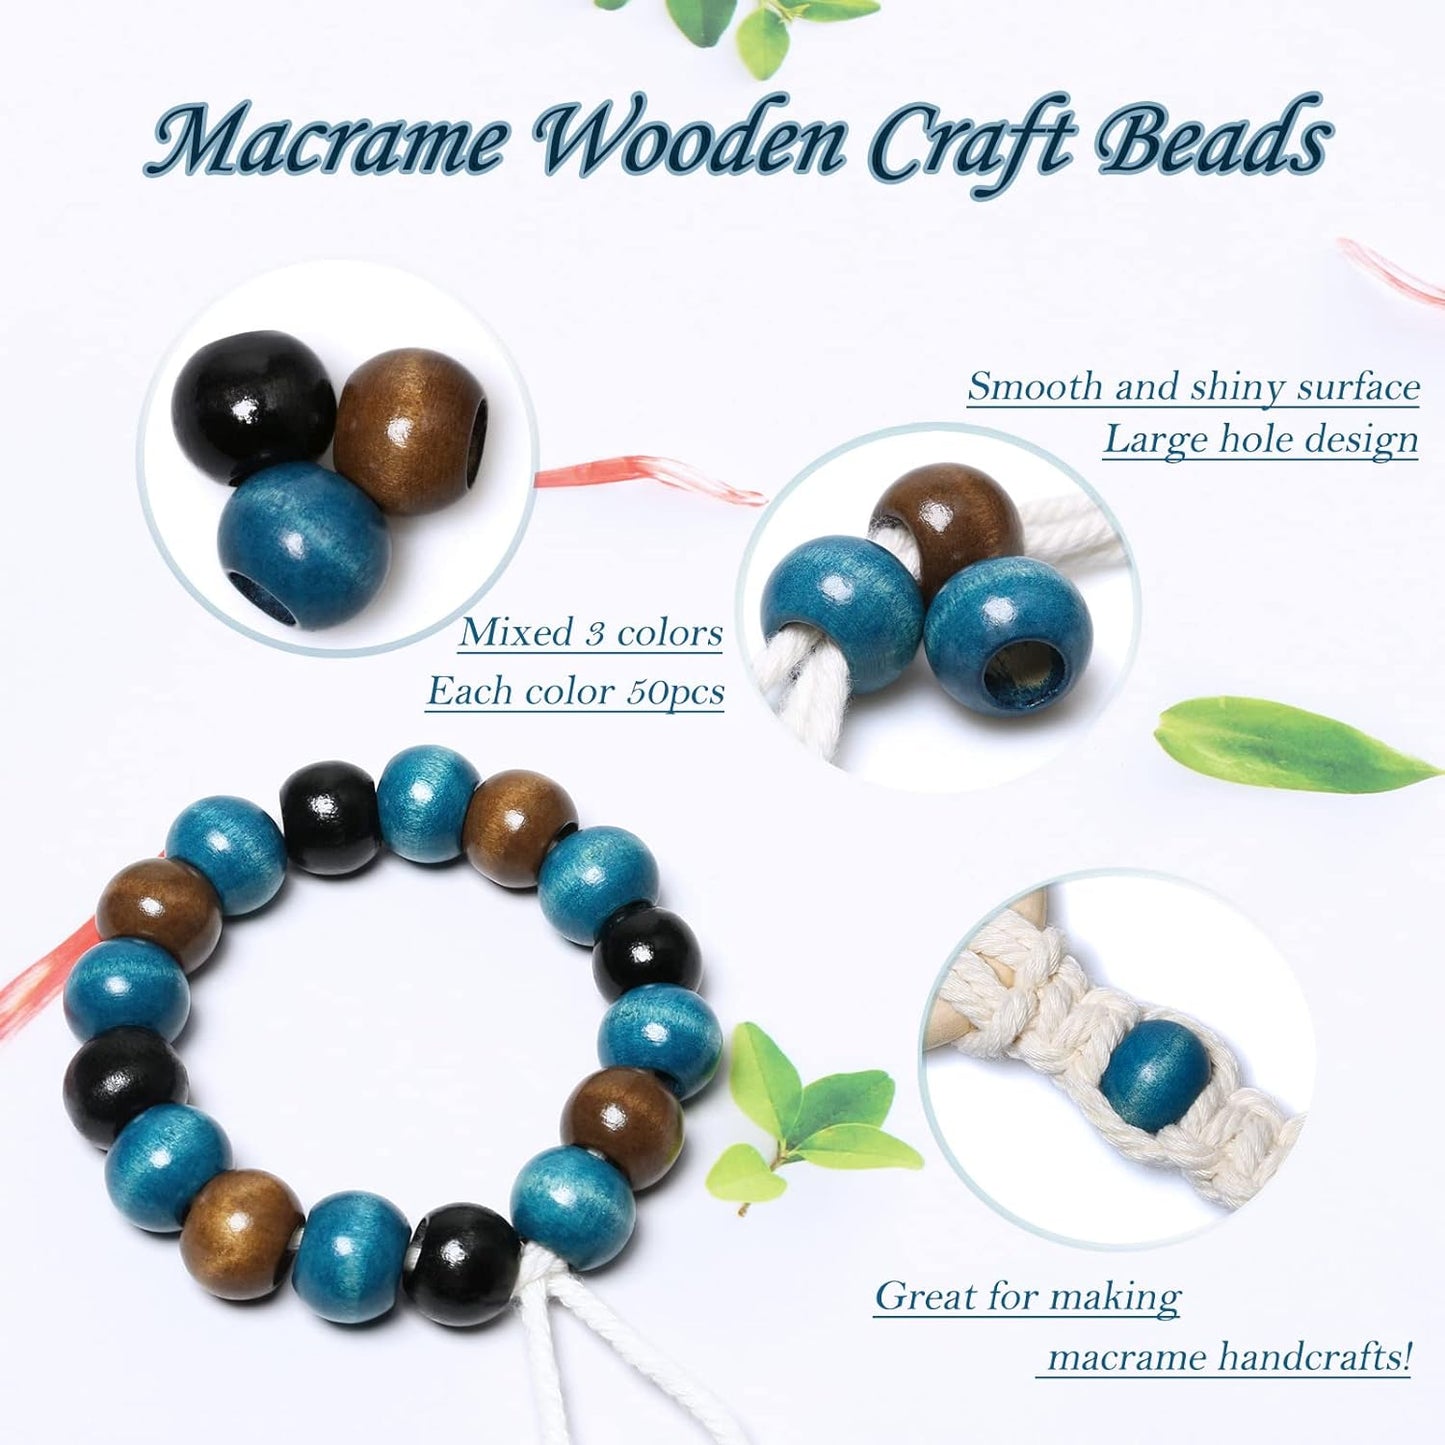 150 Pieces 20Mm Wood Beads Large Hole Macrame Wooden Beads Variety Pack, Colored Wooden round Beads for Craft/Garlands/Home Party Decor, 9Mm Hole (Brown/Black/Blue)